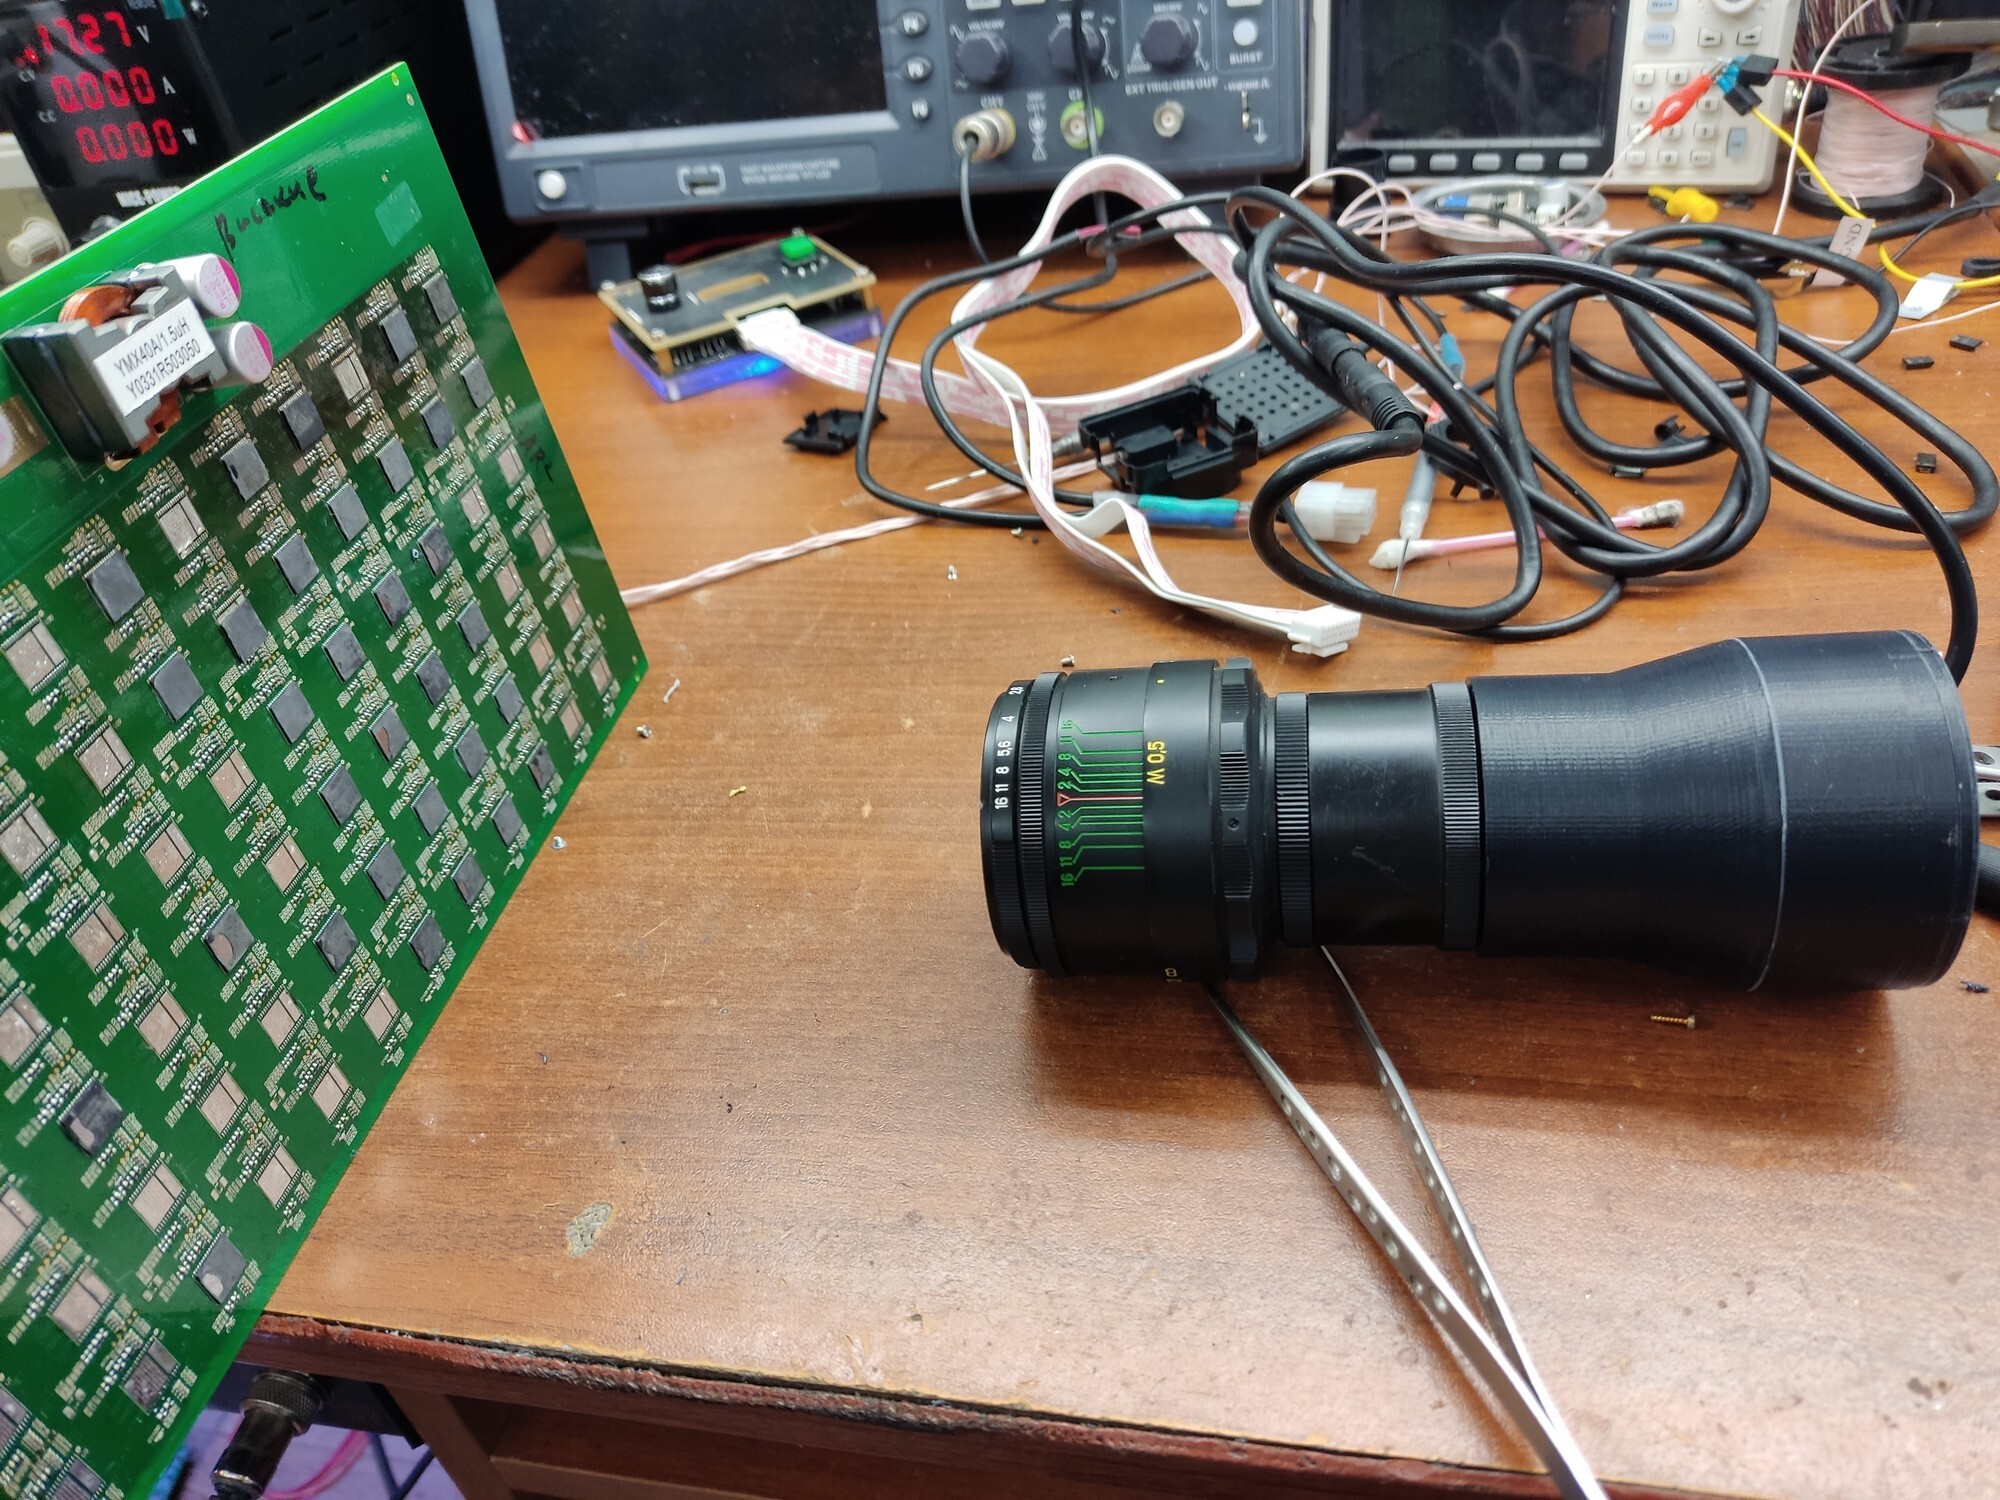 Budget digital microscope from scraps - My, Homemade, Electronics, With your own hands, Radio amateurs, Microscope, We make a microscope, Hobby, Rukozhop, Electronics repair, Constructor, Longpost, Needlework with process, Repair of equipment